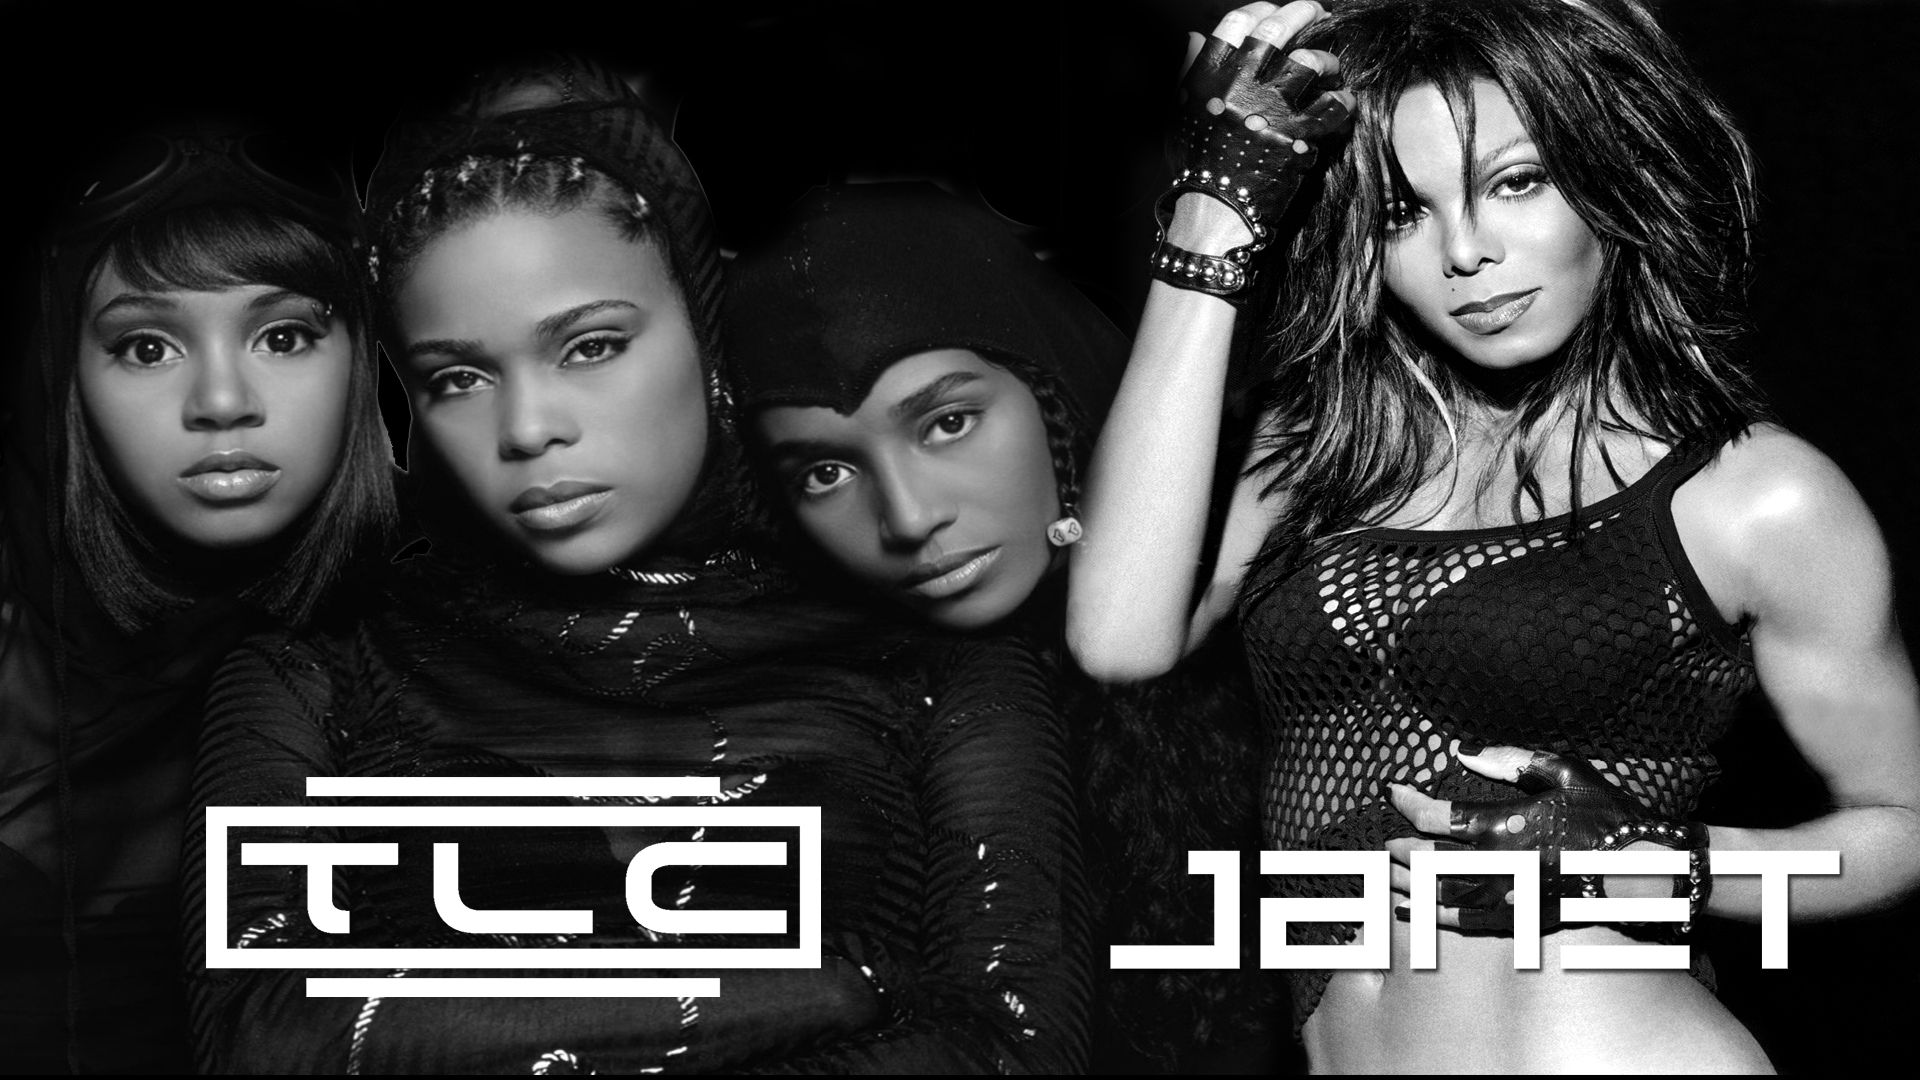 Janet Jackson and TLC - Wallpaper by lustrious zombies on DeviantArt